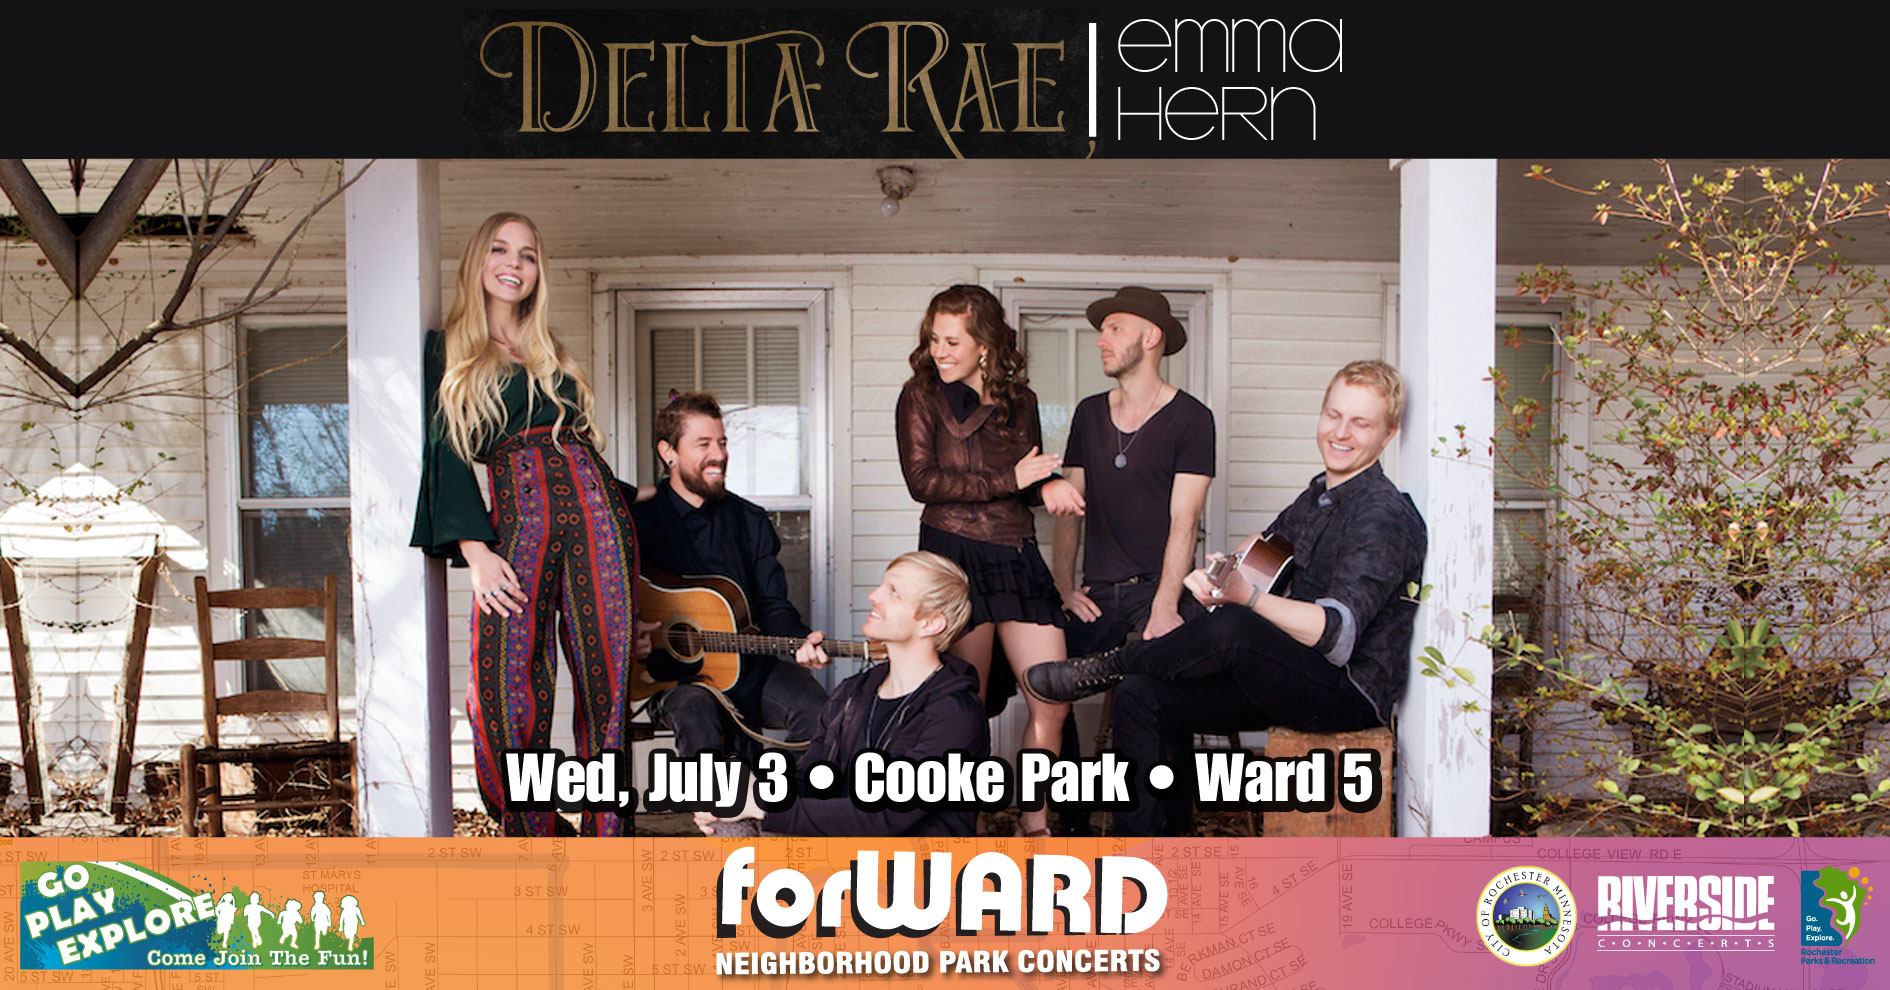 Delta Rae w:Emma Hern at forWARD Concert Series in Rochester, MN